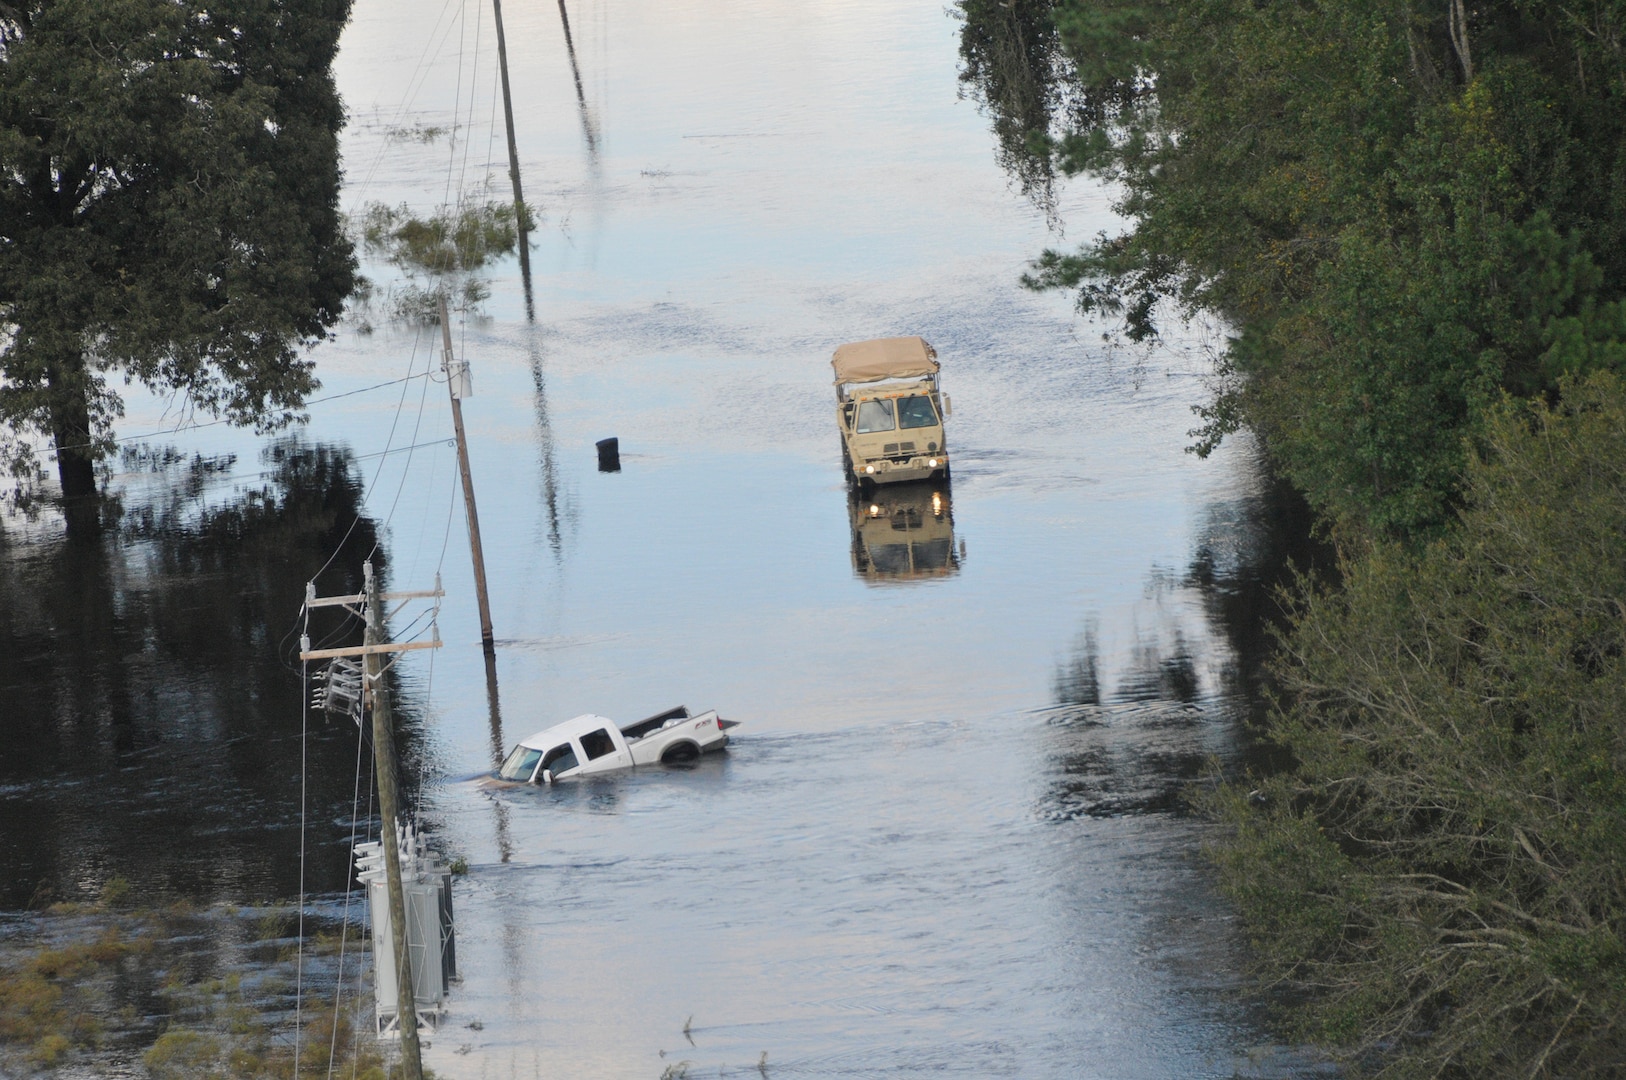 A U.S. Army high clearance vehicle makes its way to a stranded pick up truck on a flooded roadway near Nichols, South Carolina, Sept. 18, 2018.